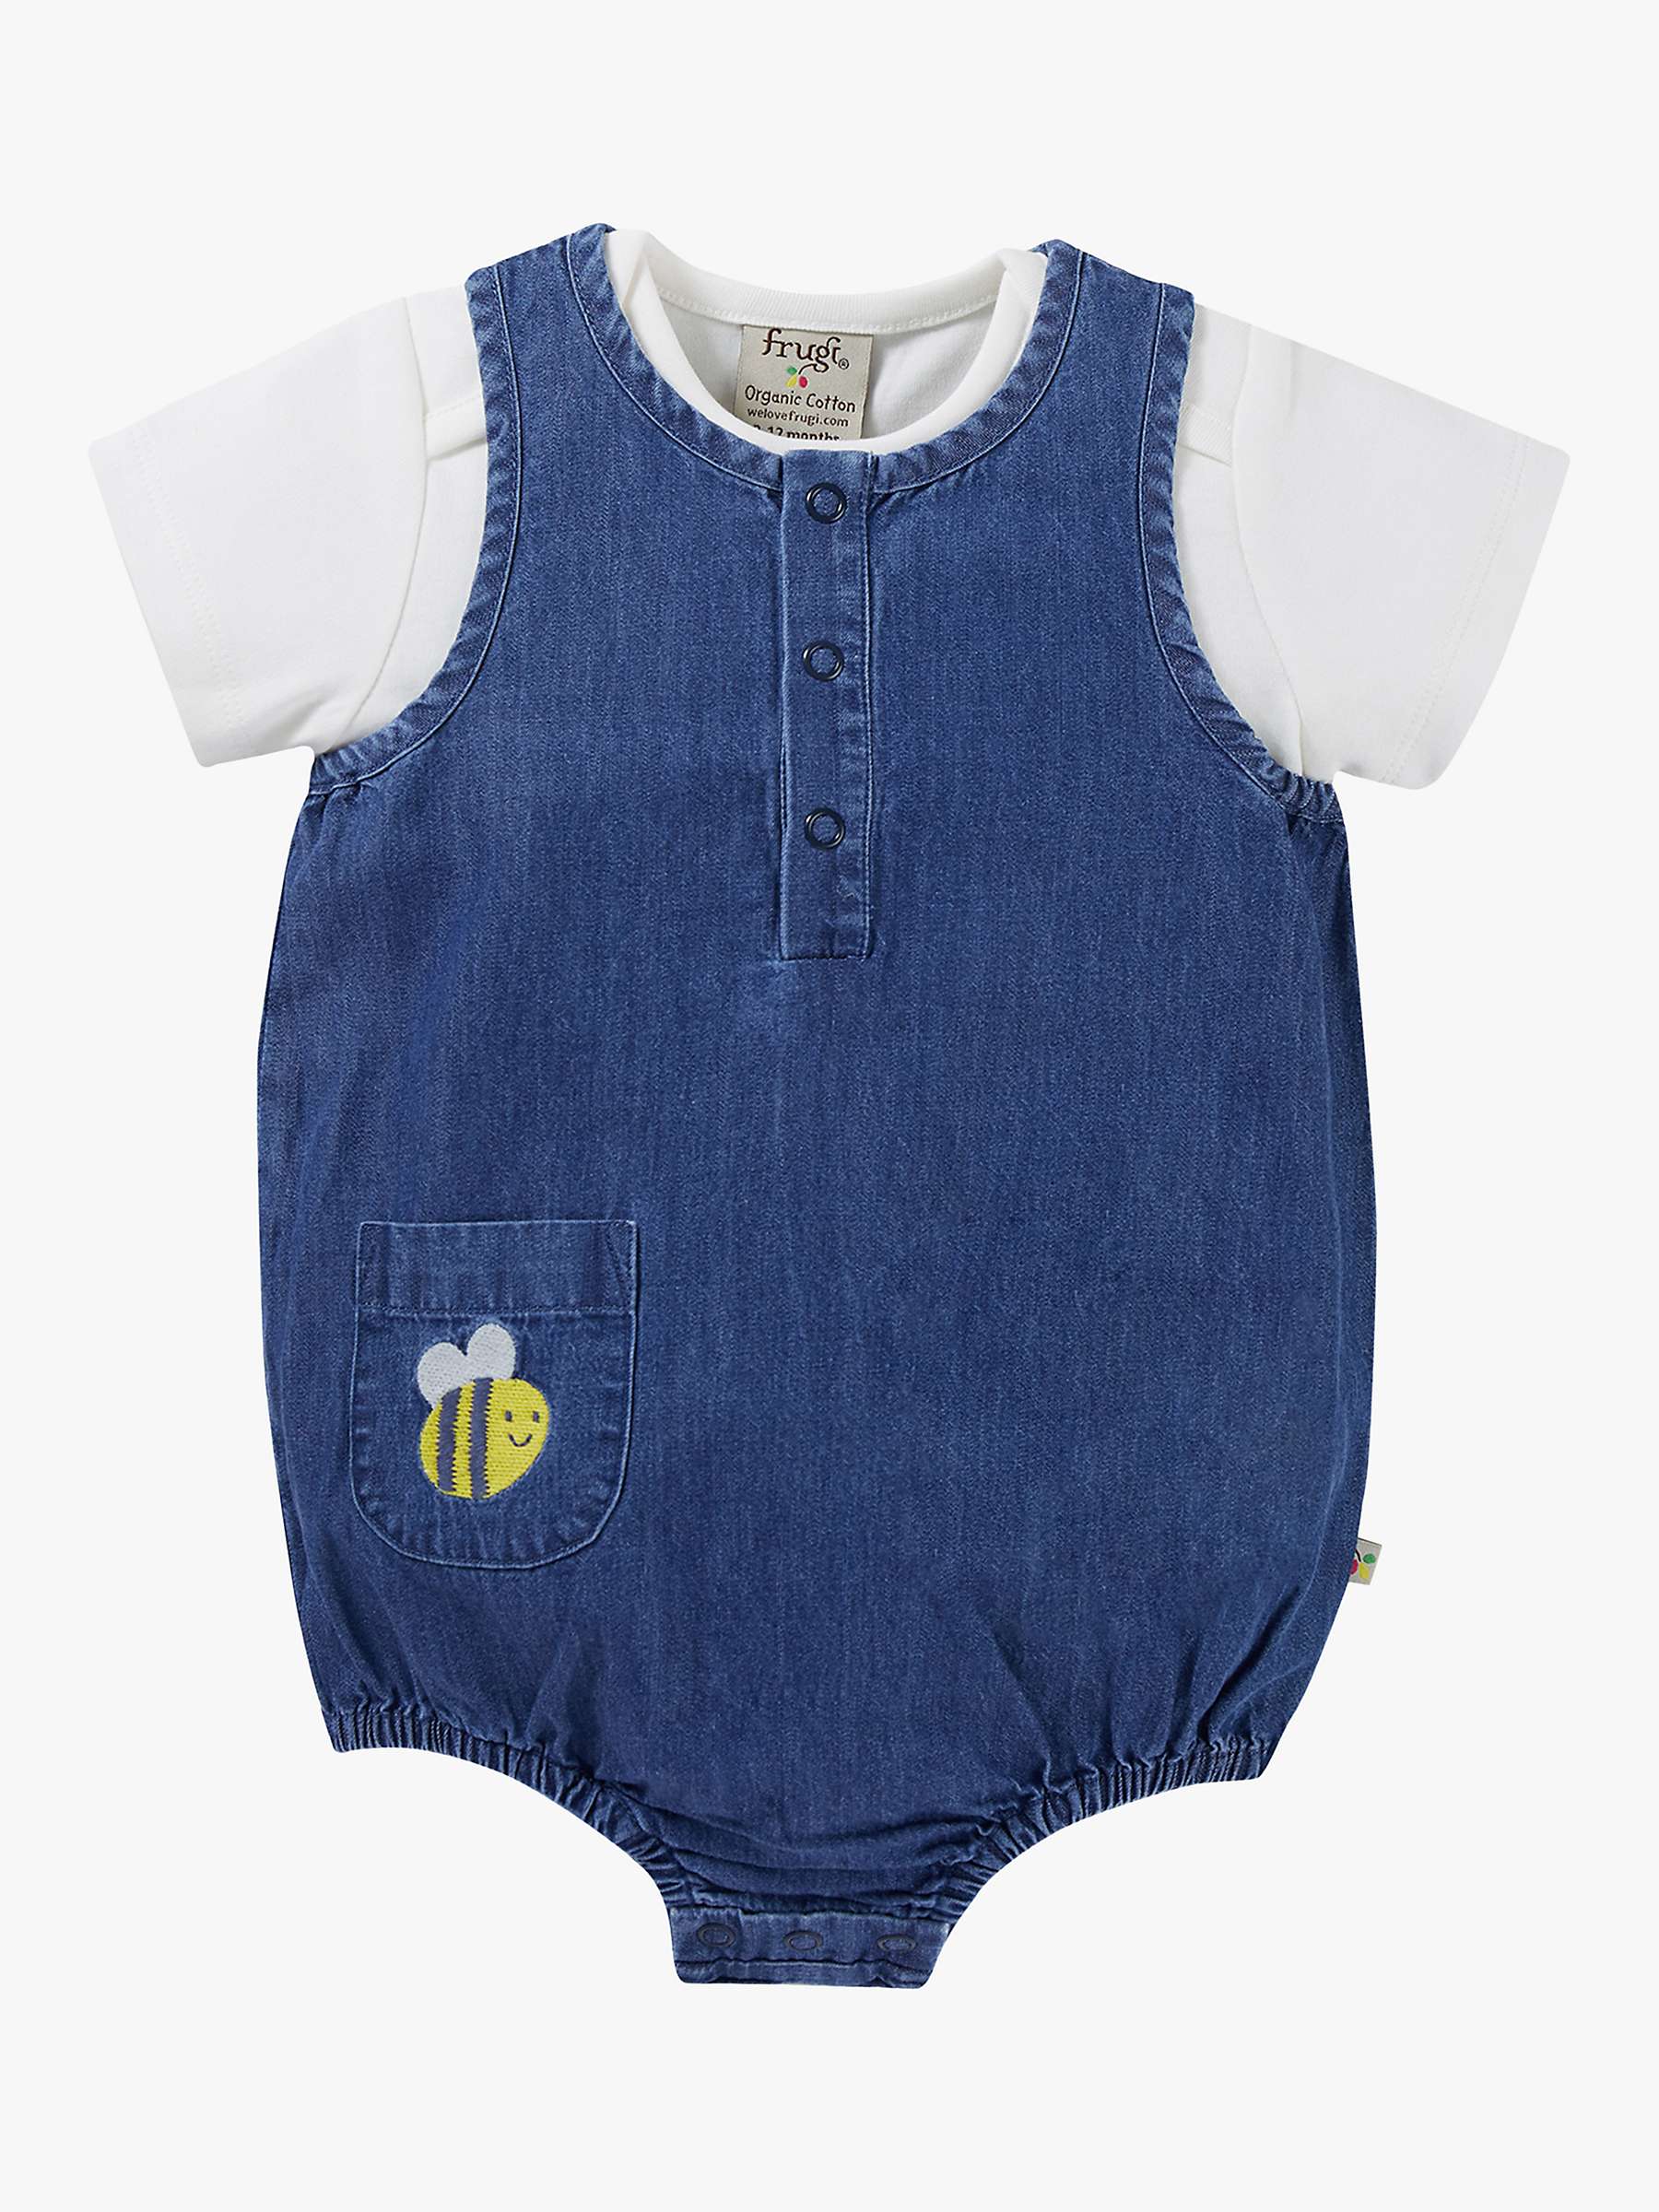 Buy Frugi Baby Cadgwith Organic Cotton Romper Outfit, Chambray Online at johnlewis.com